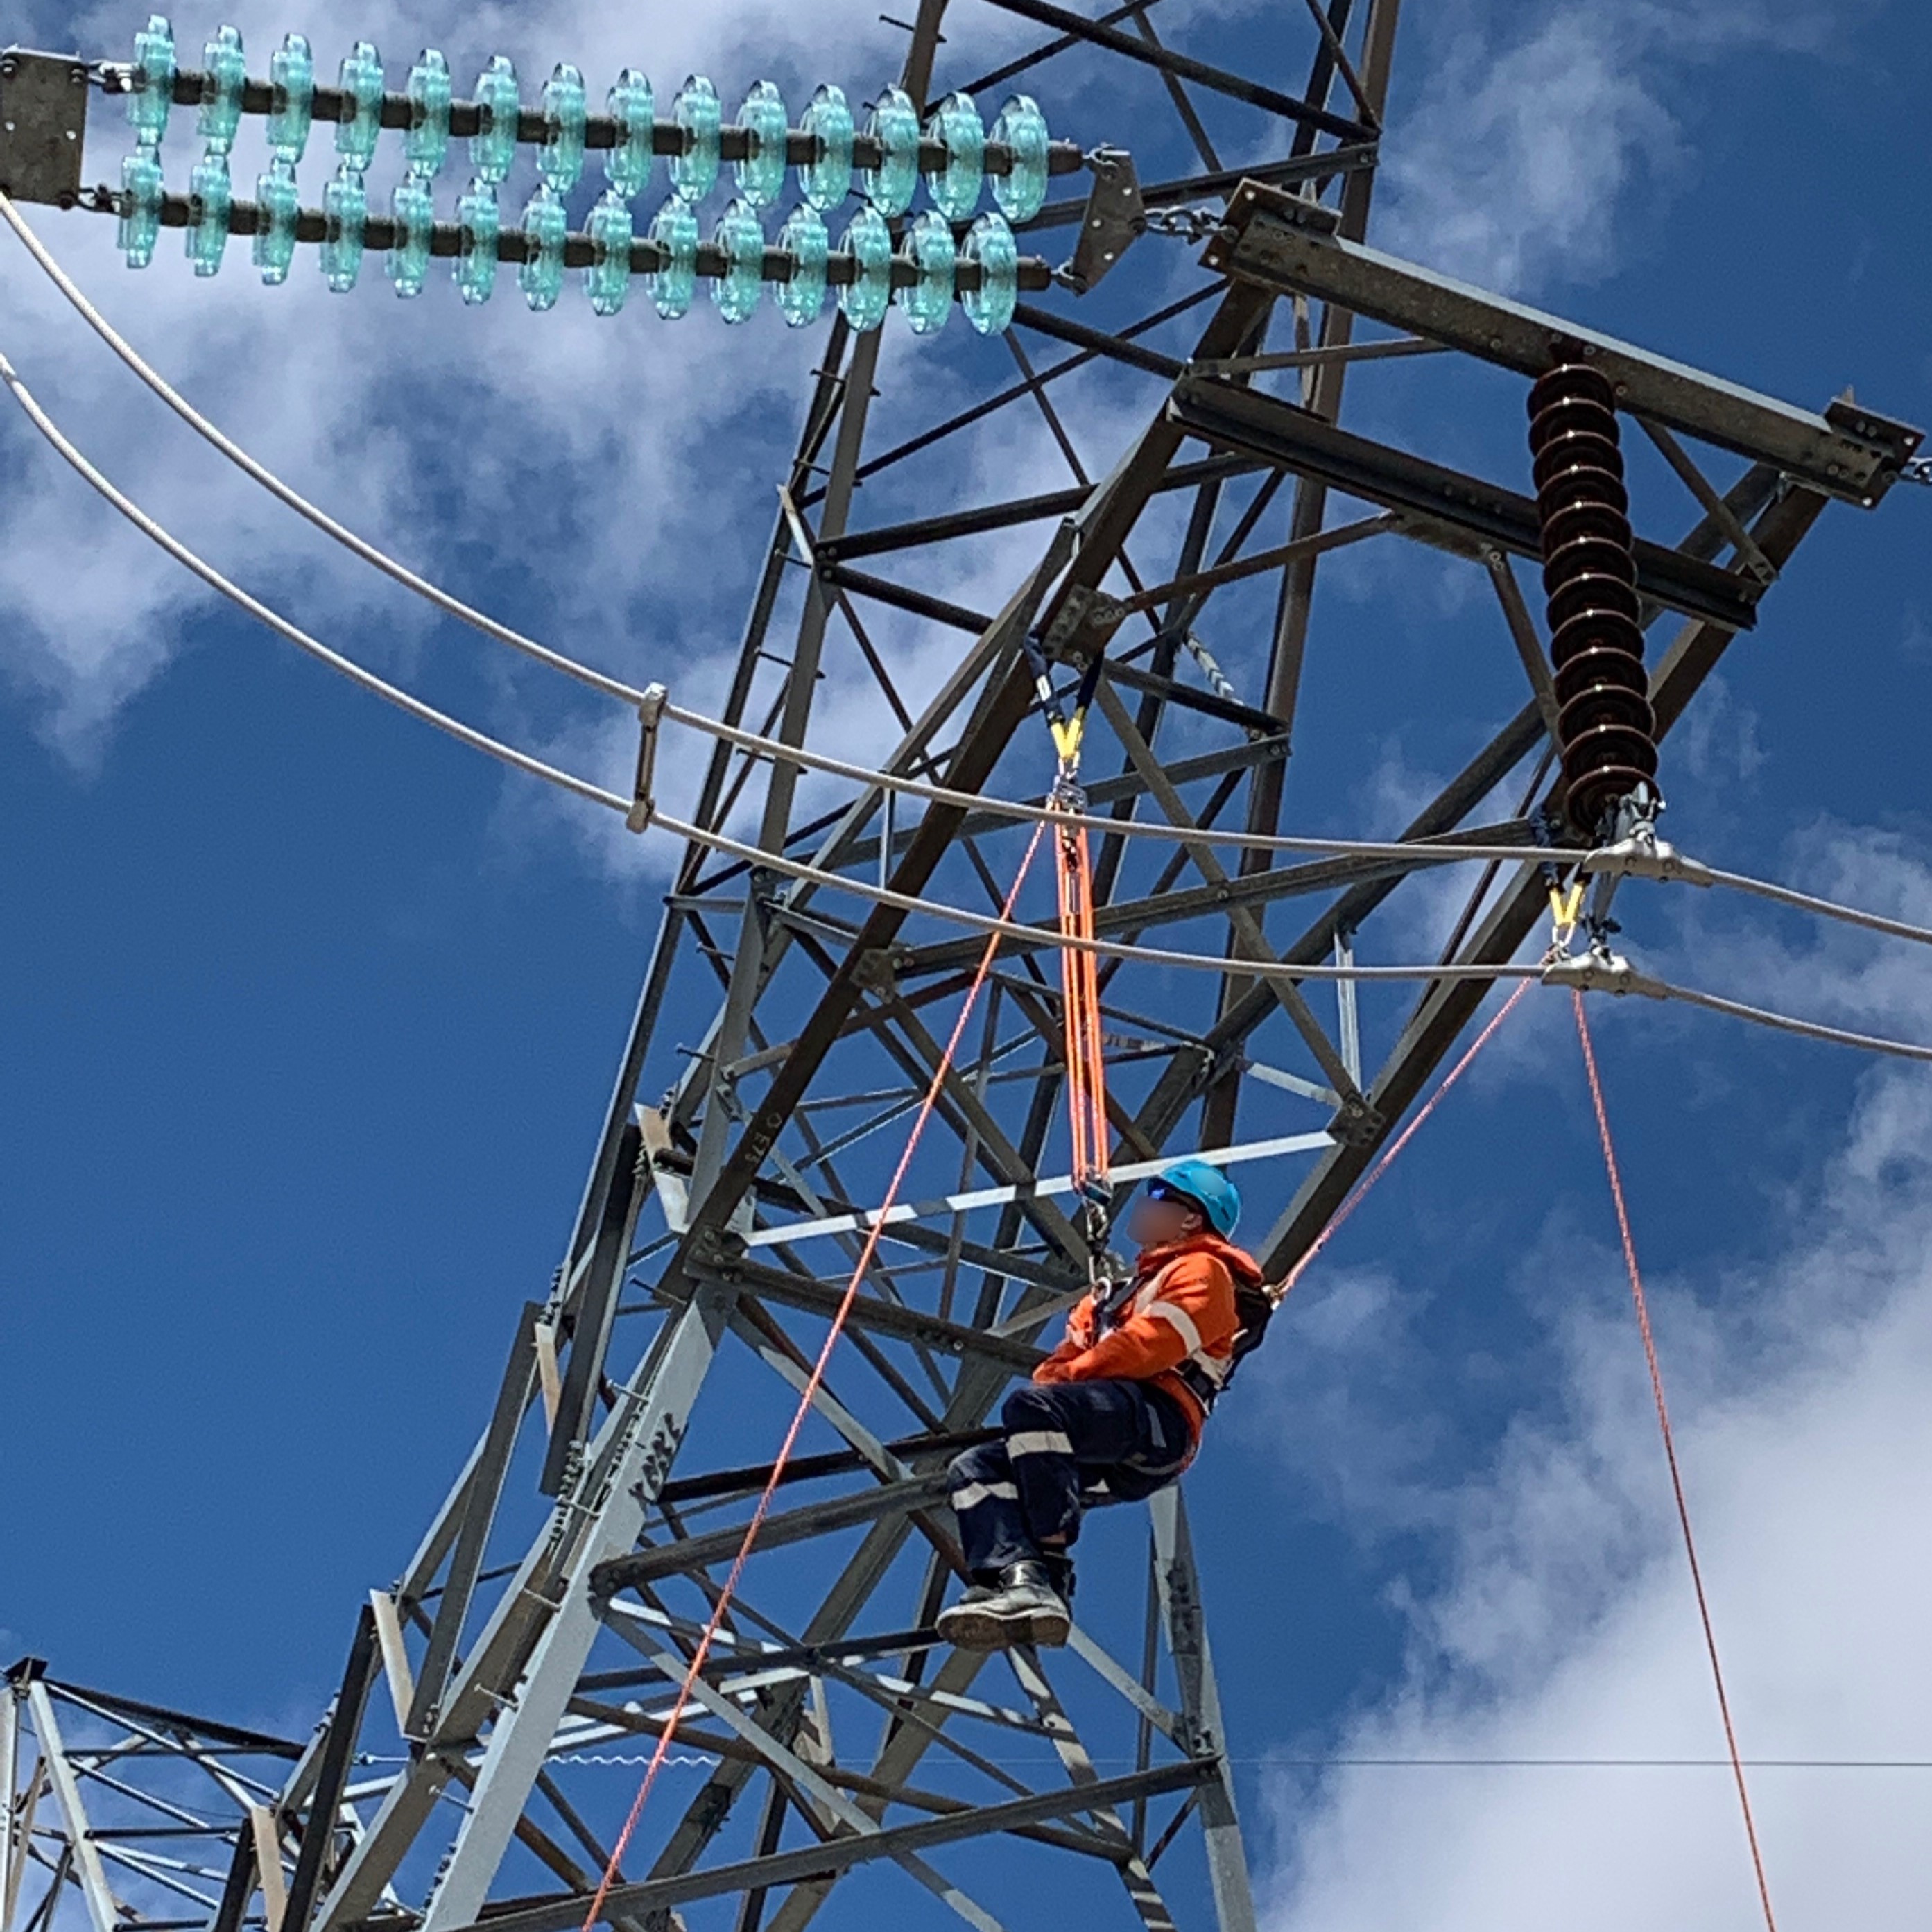 Barehand Access Methods with Dielectric Rope for Transmission Line Maintenance